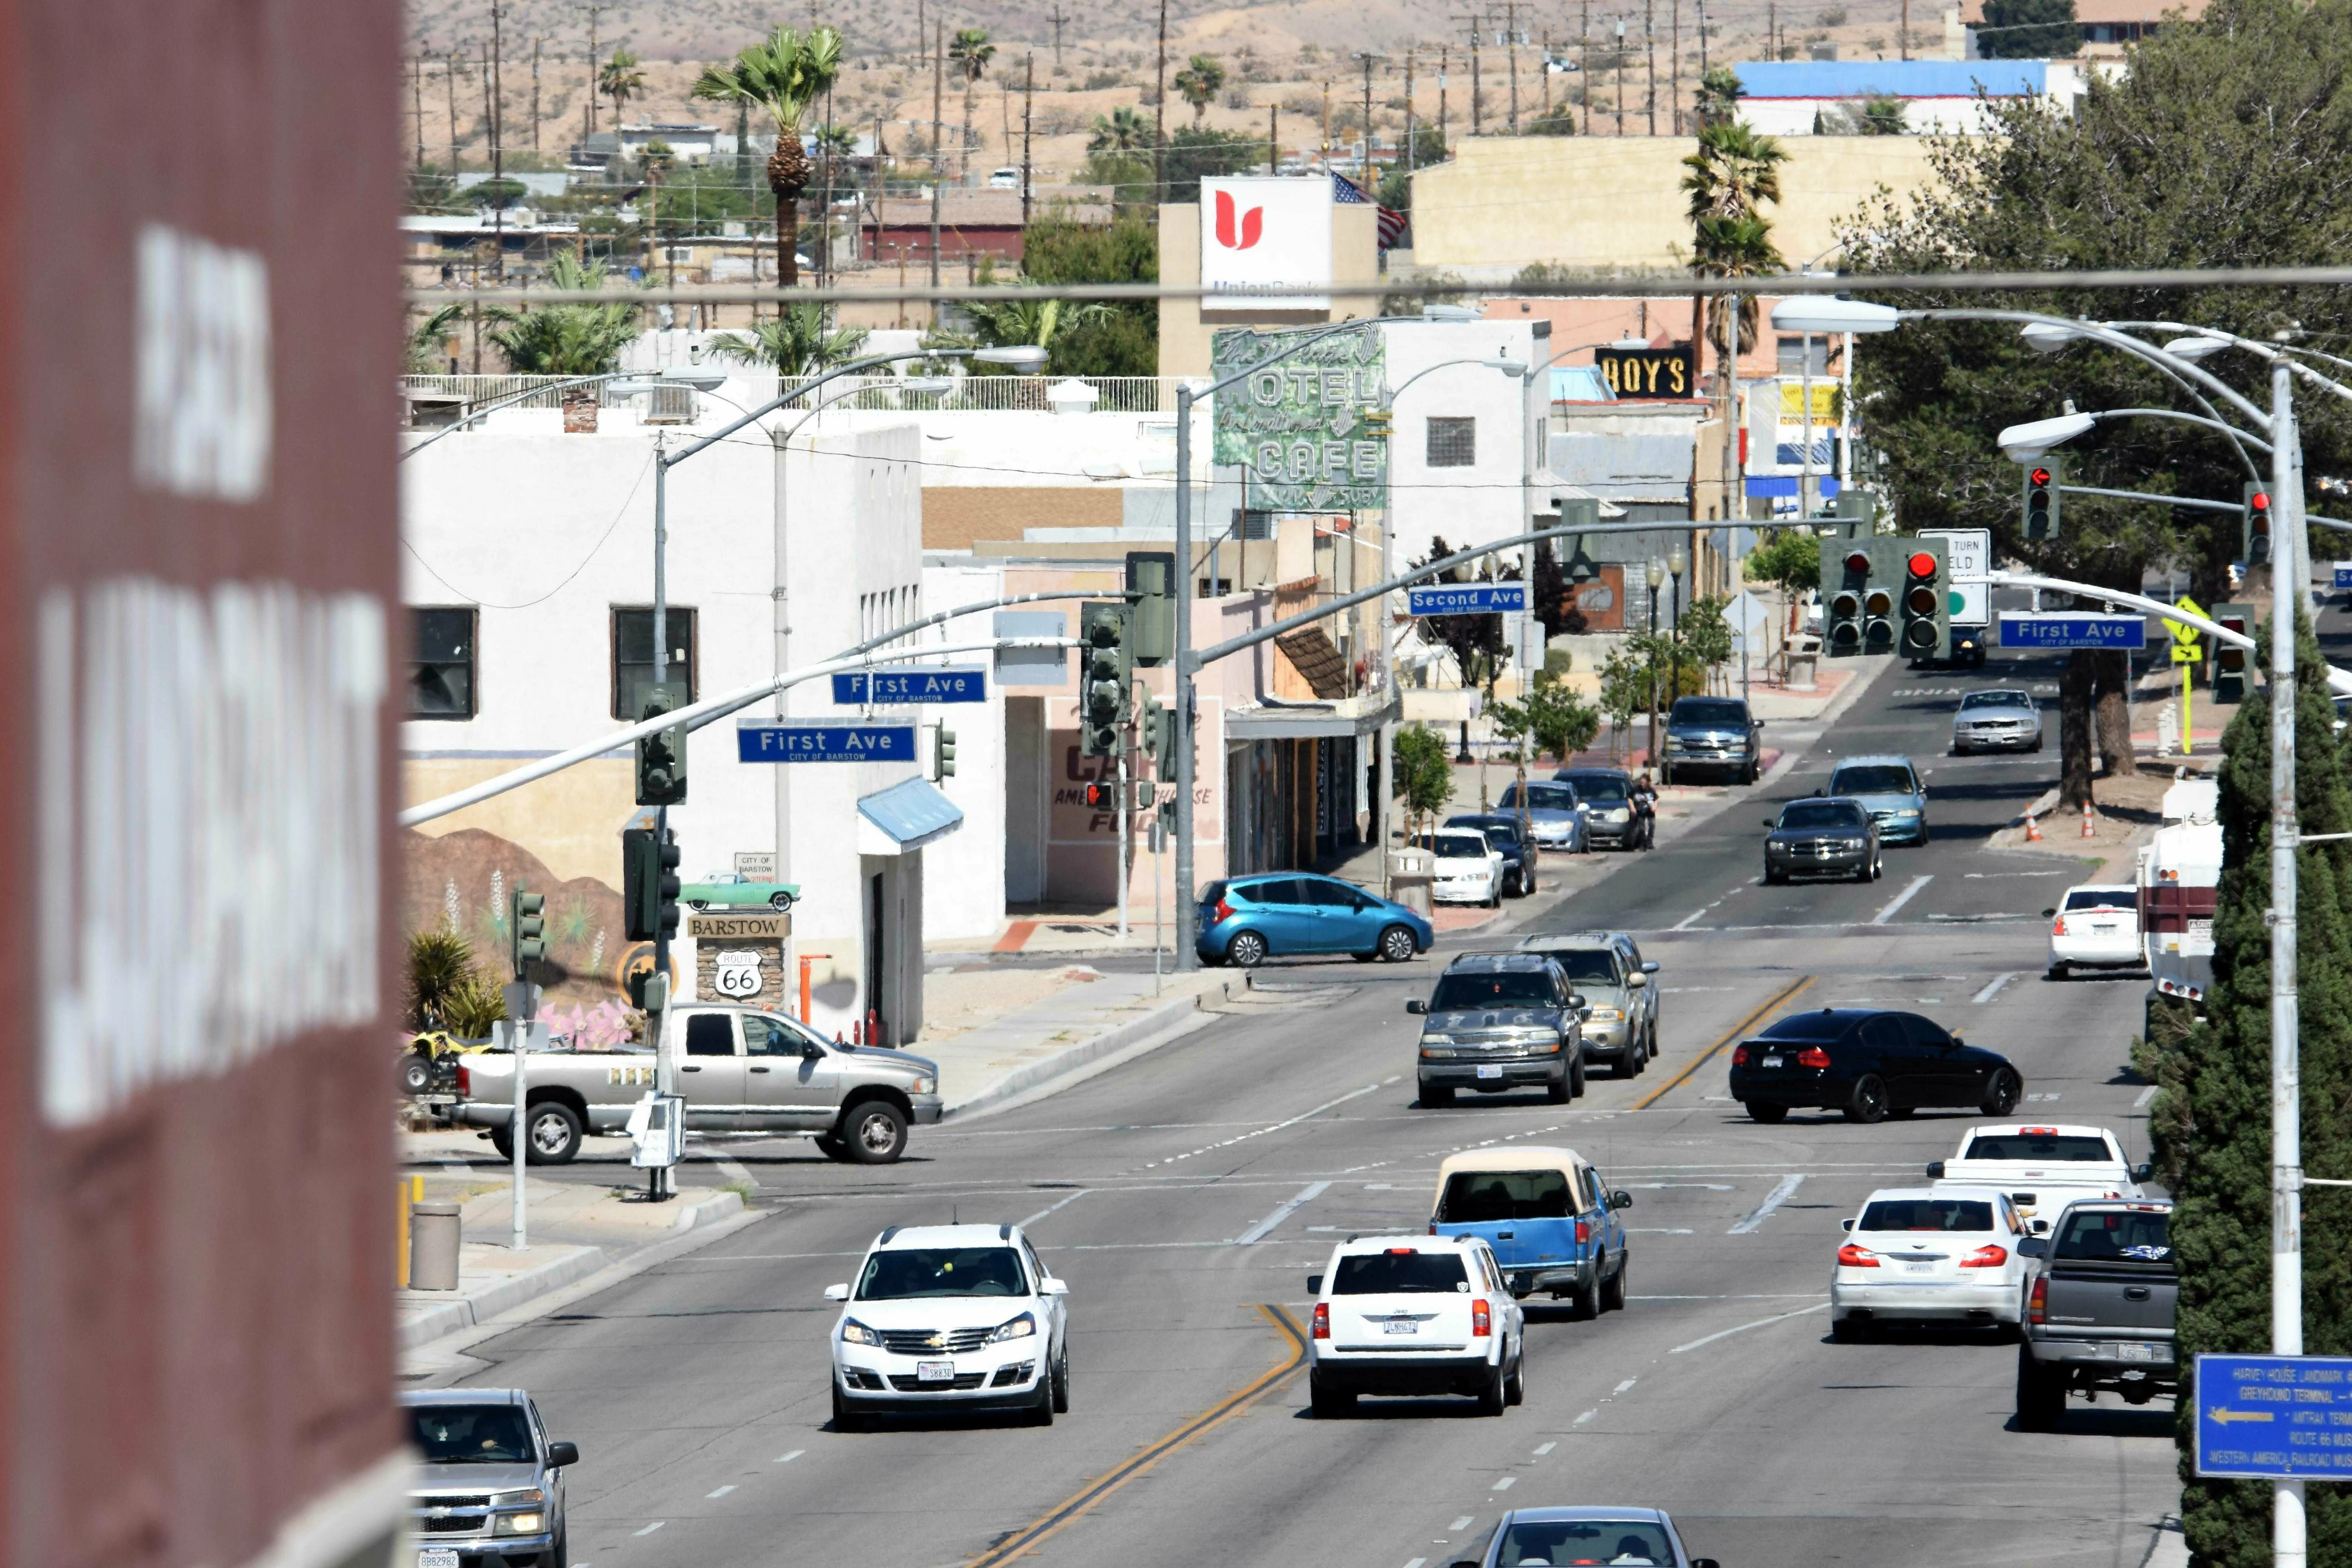 Realtors question study ranking Barstow, SVL high in affordable housing